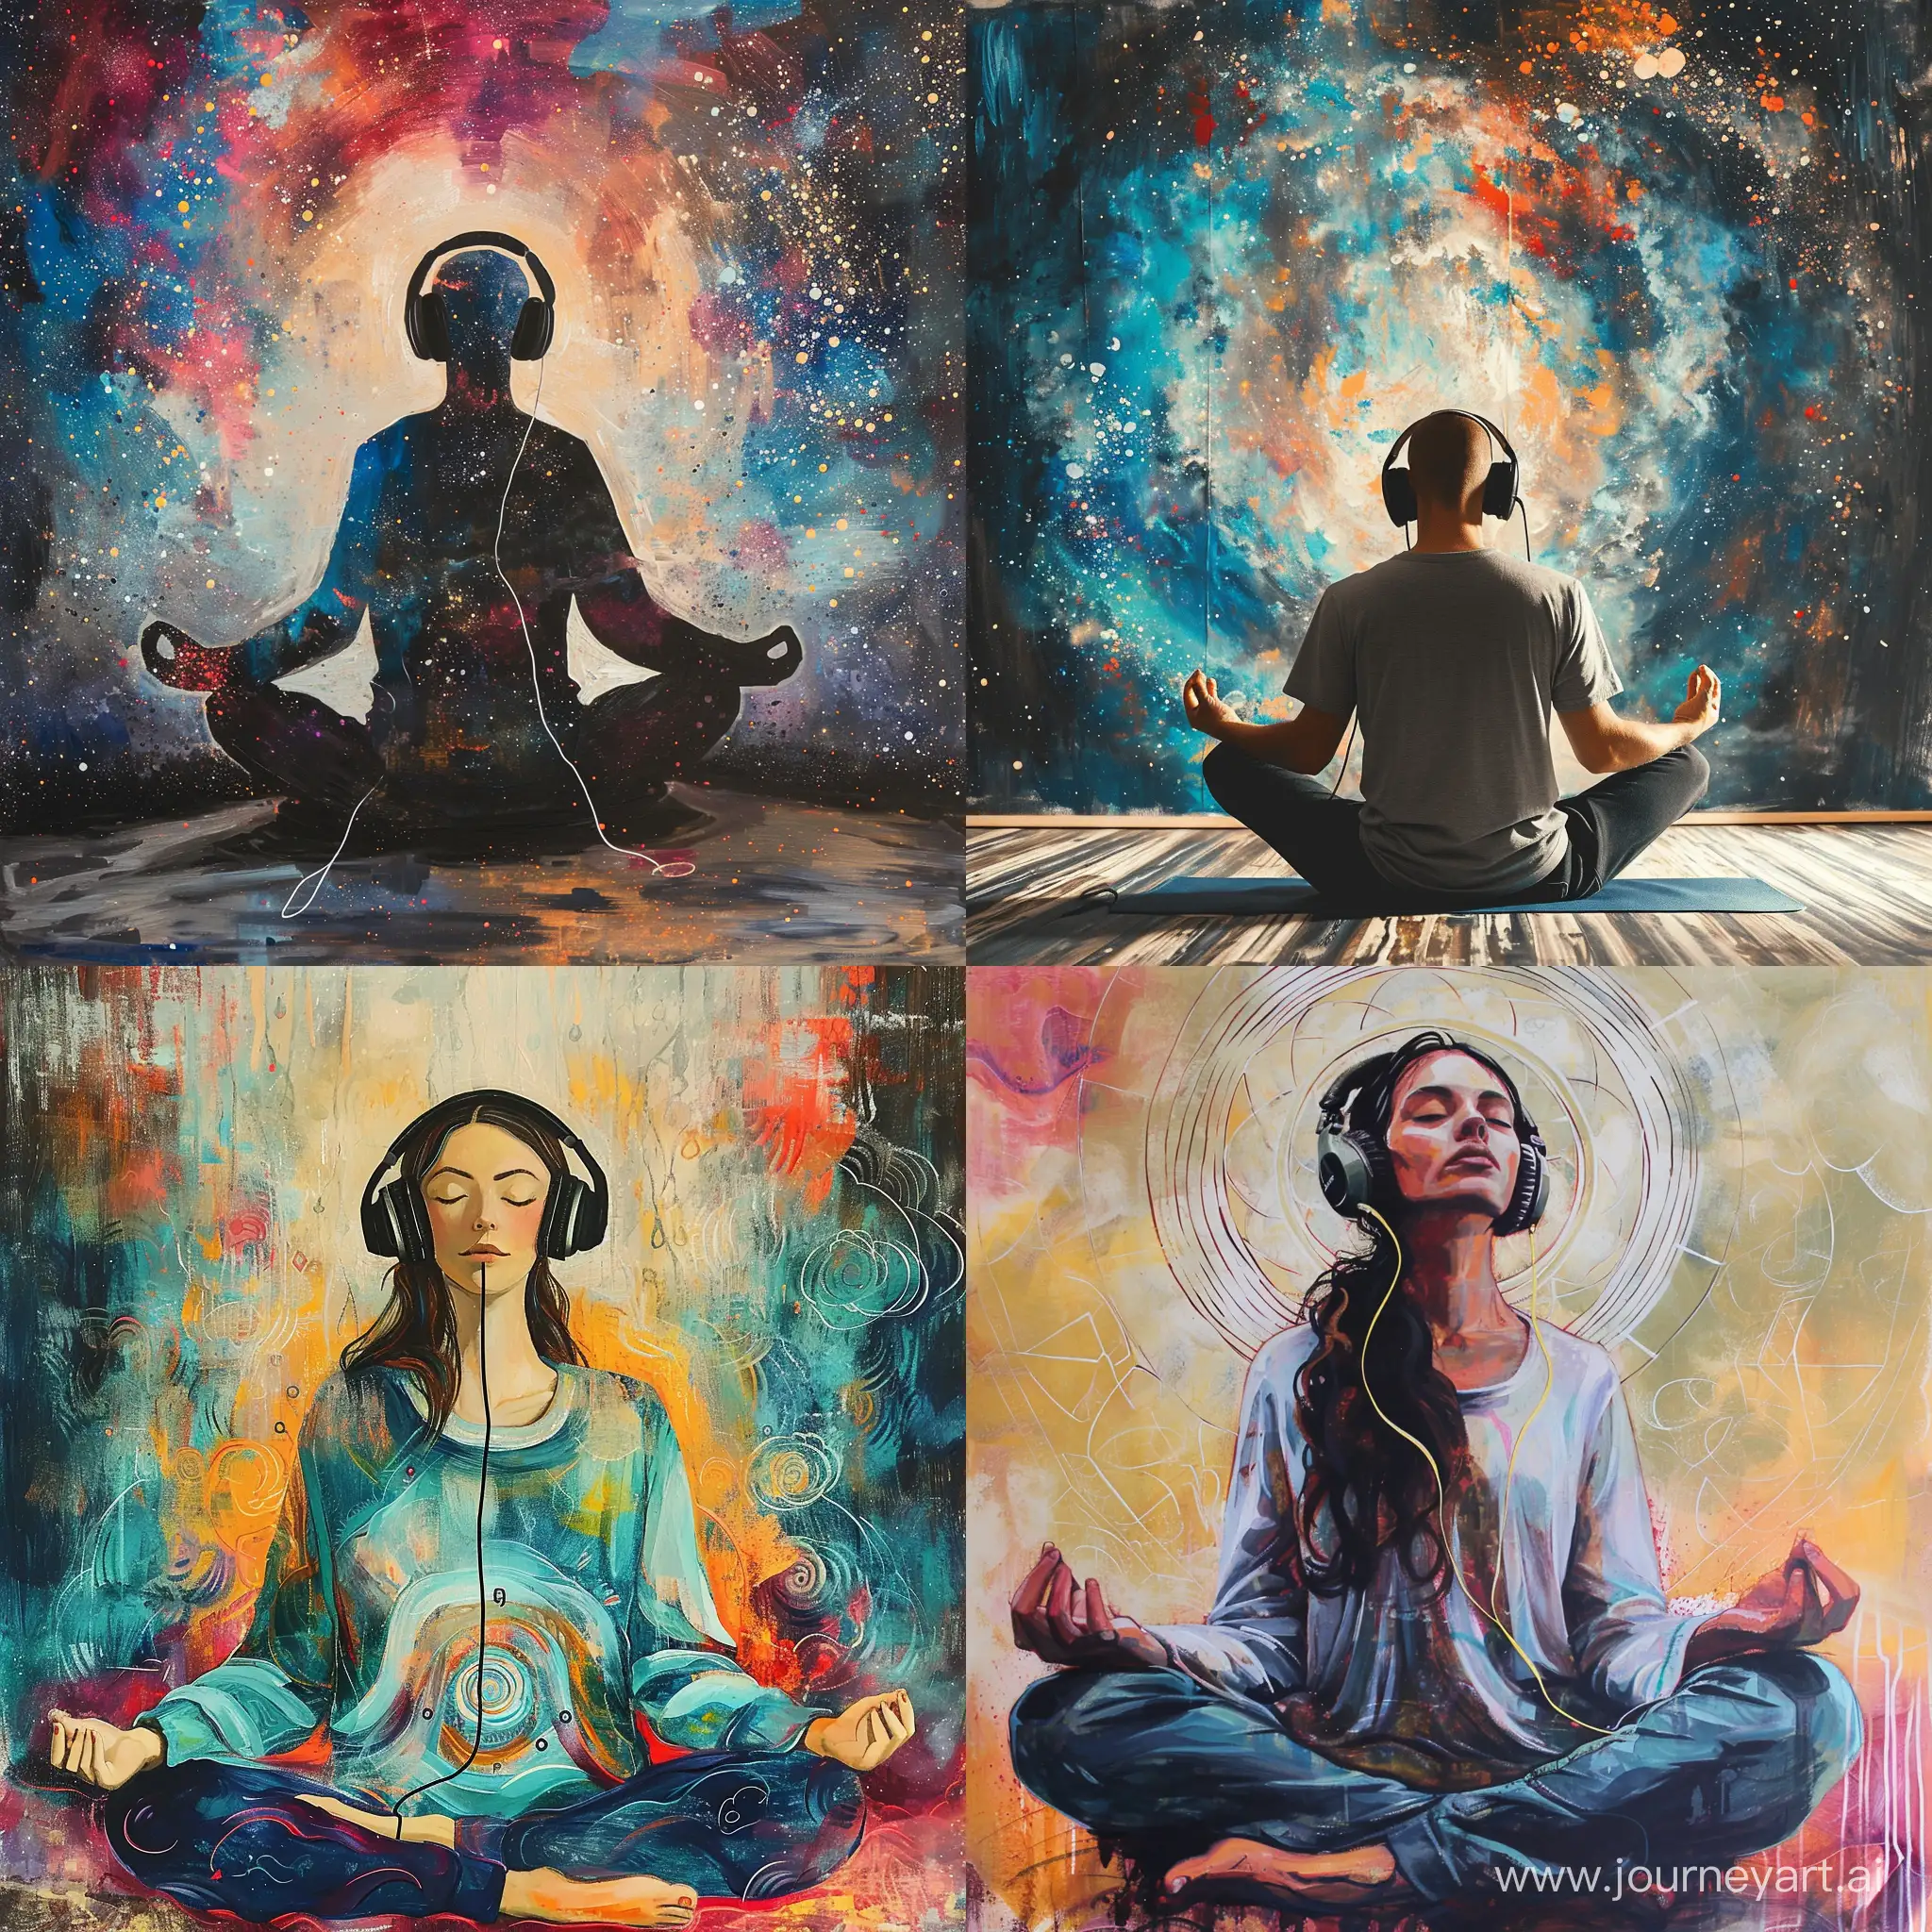 Meditative-Harmony-Tranquil-Figure-in-Mystical-Surroundings-with-Headphones